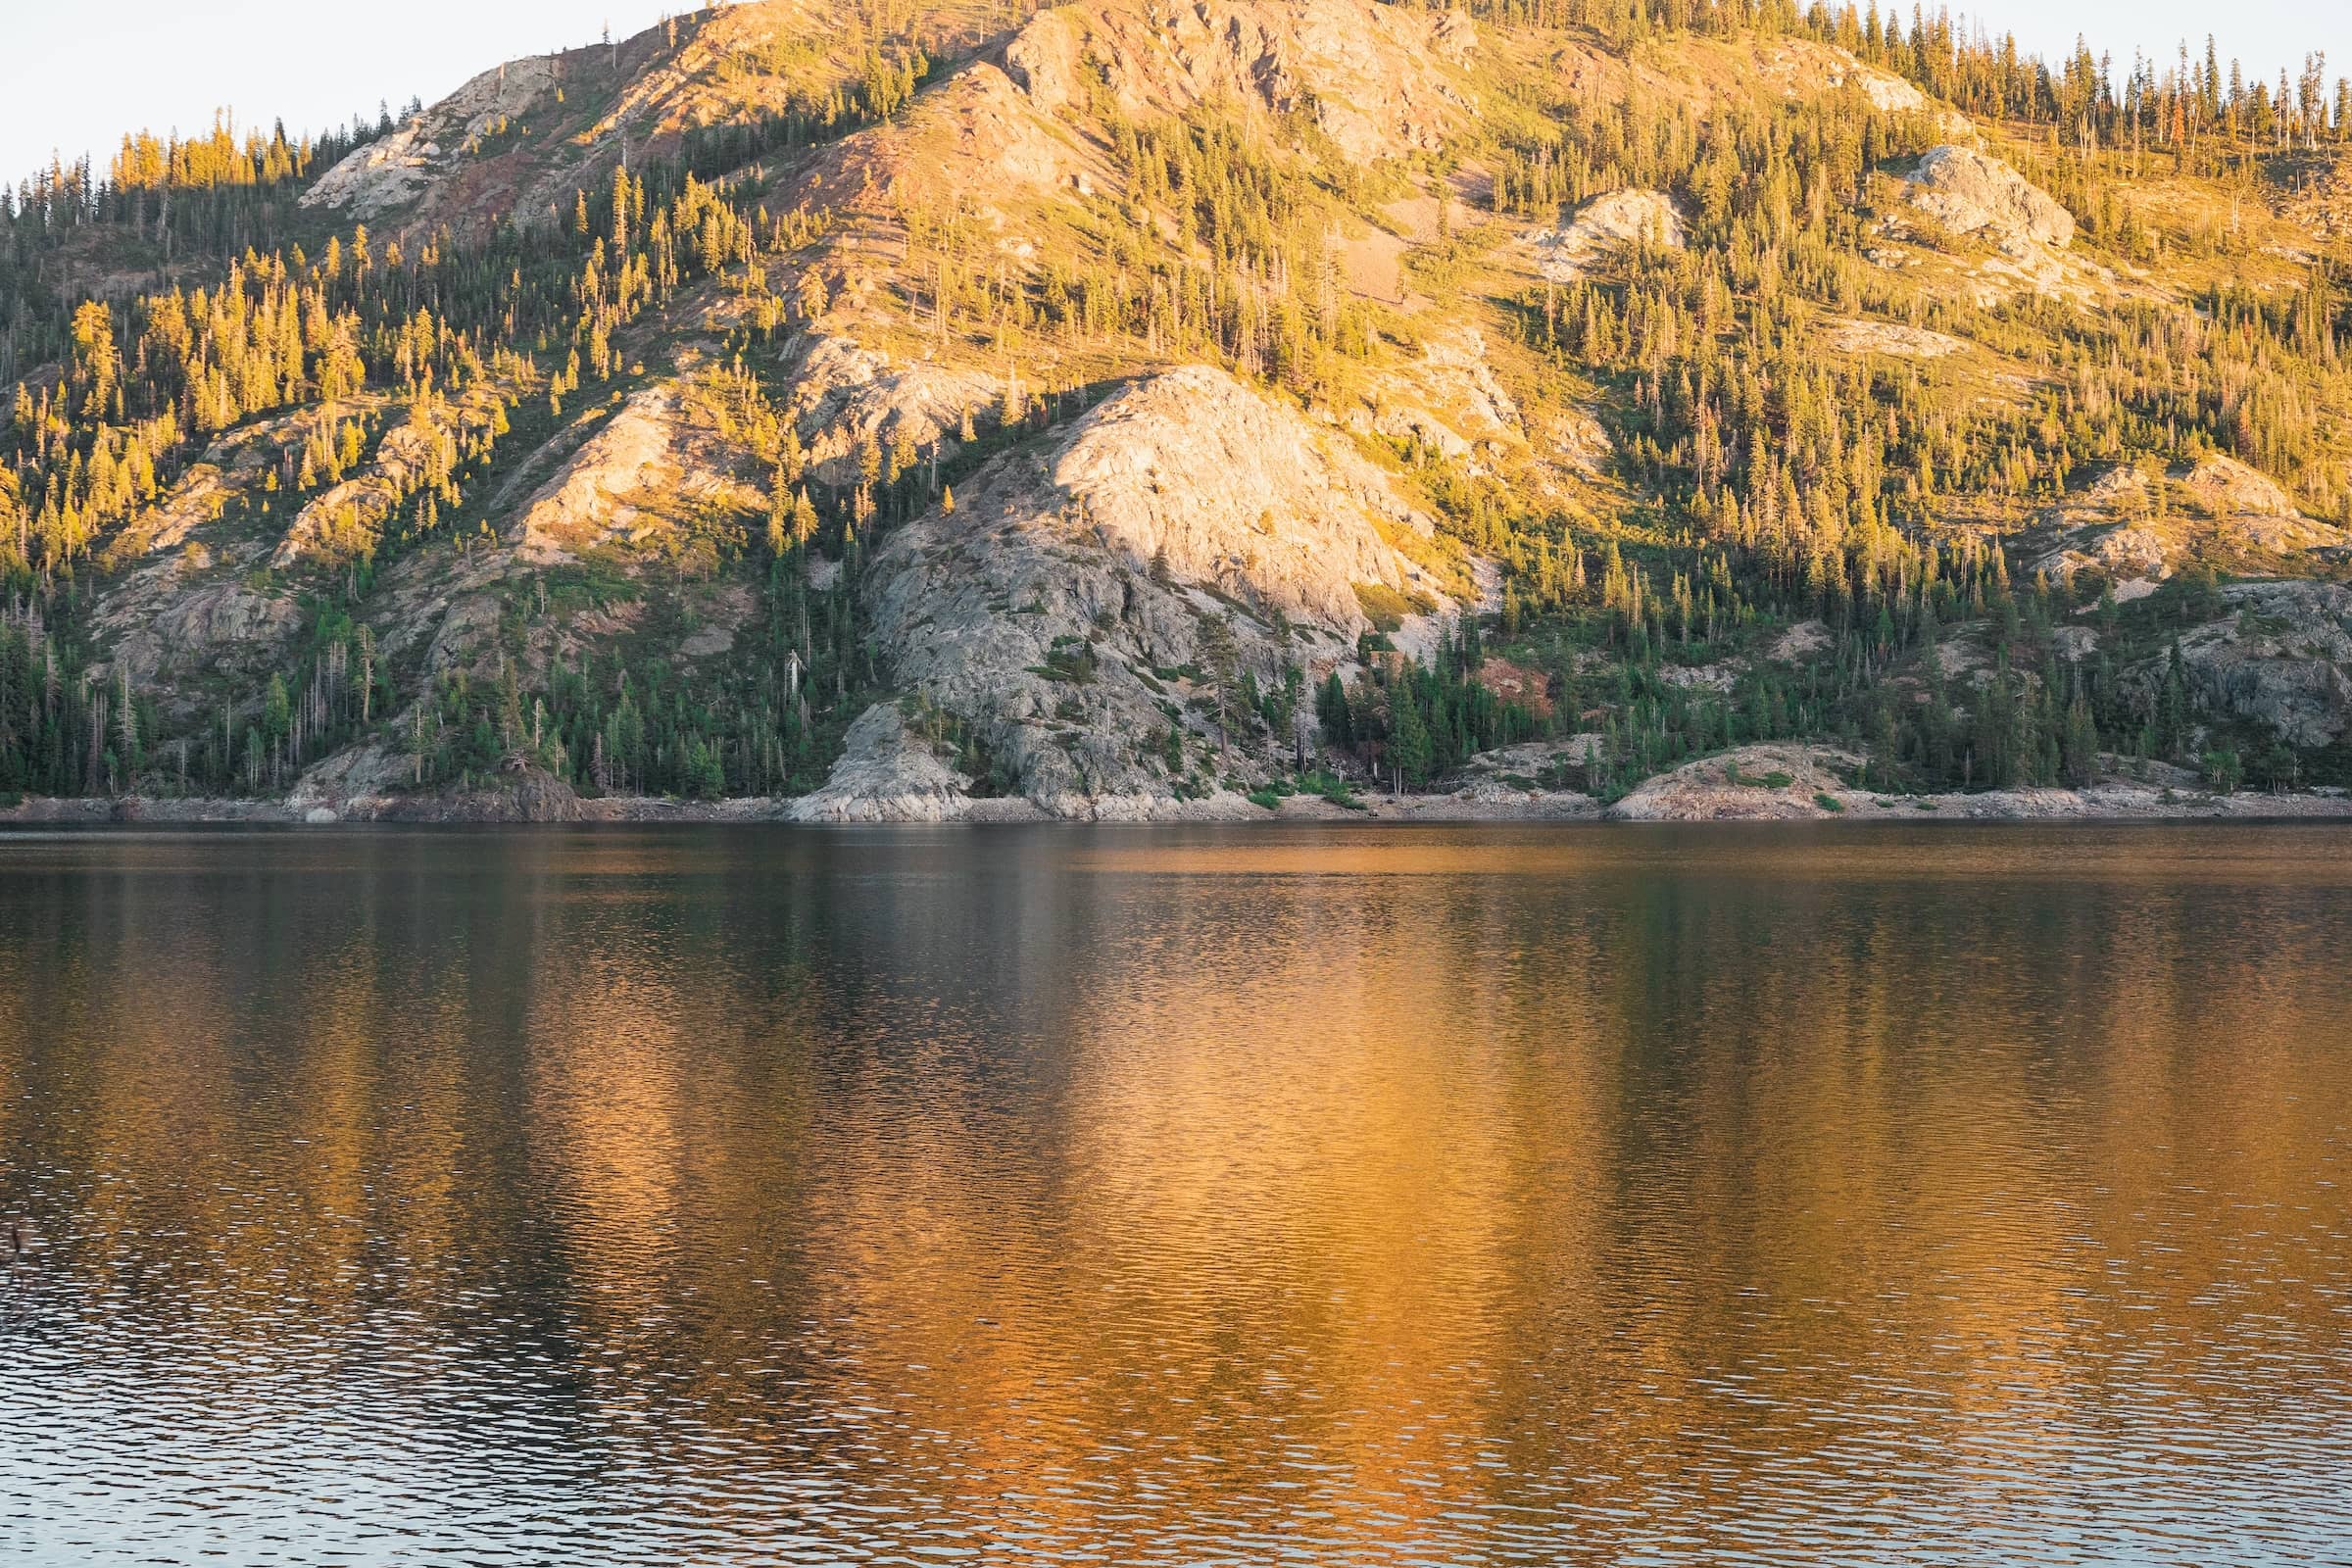 A 50/50 photo of a lake and a mountainous shoreline zoomed in to the distance creating a contrast between the two, with golden light enveloping all.